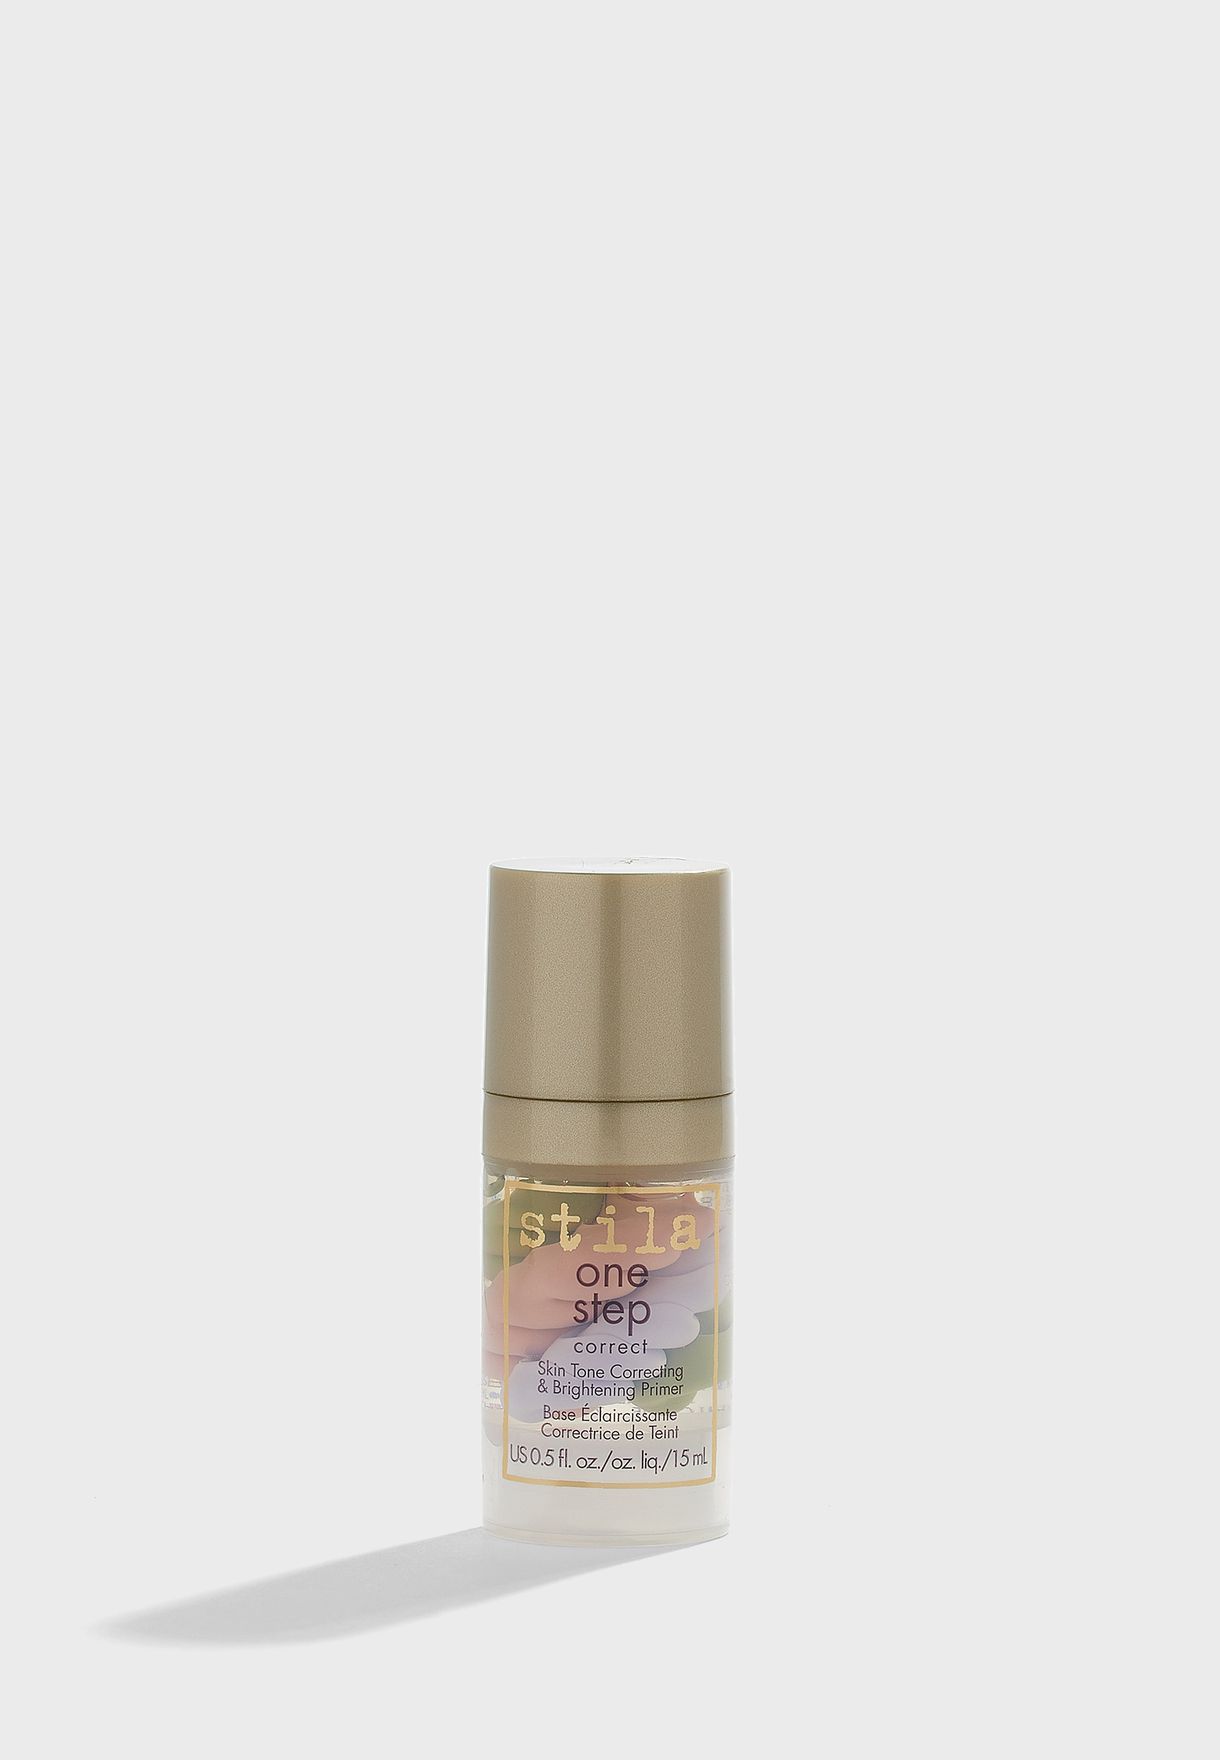 One Step Correct - Deluxe 15Ml